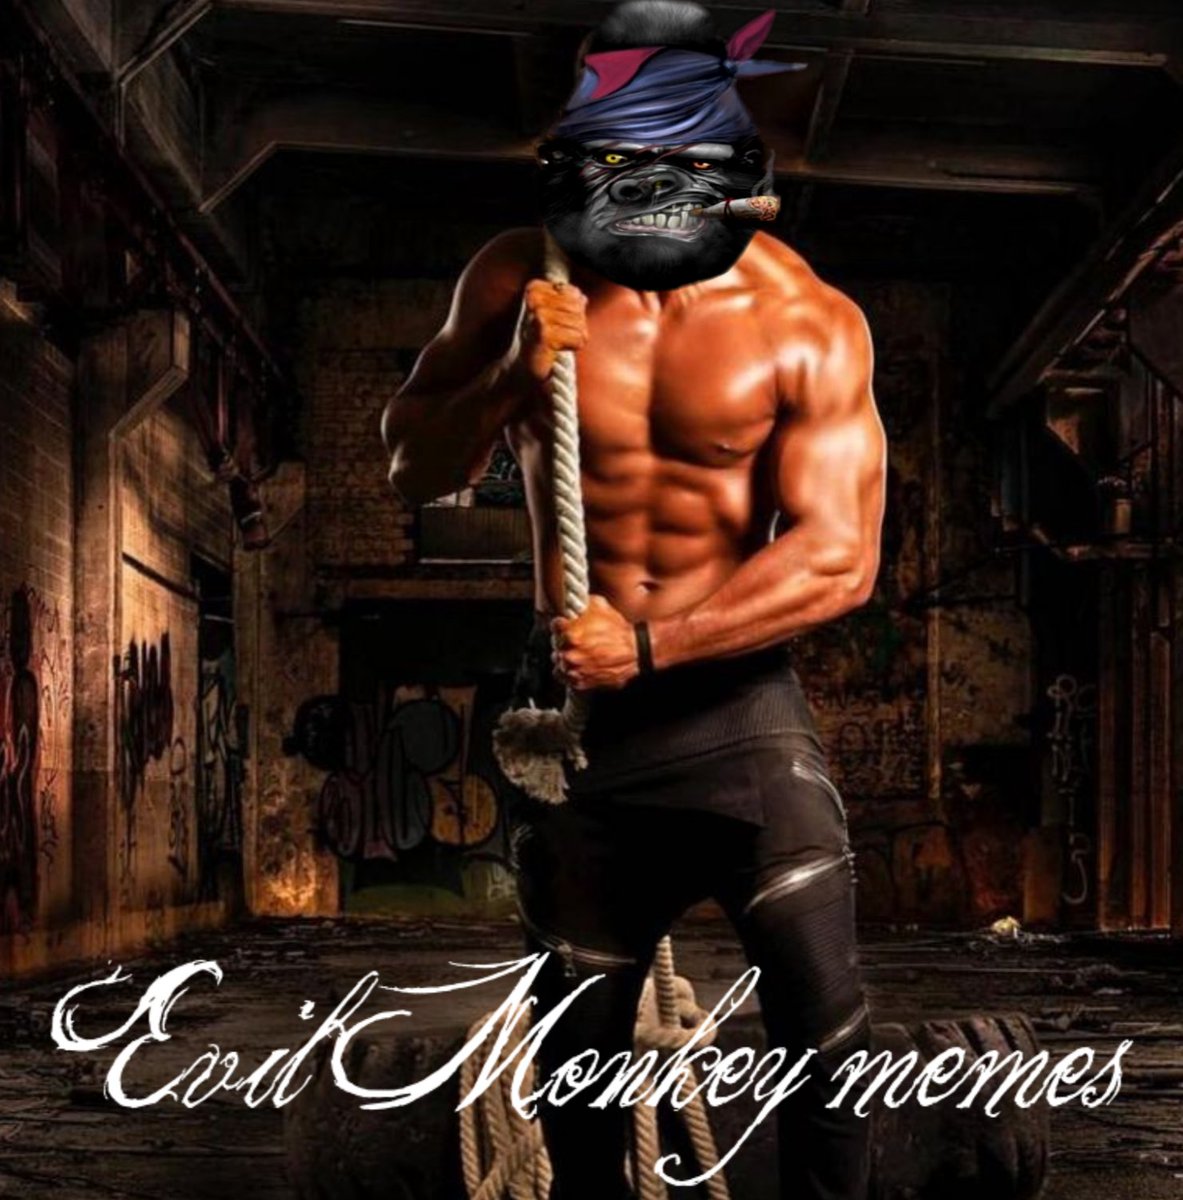 Evil Monkey . @Midges_Homer can be soft and cuddly but, is a Beast with Killer memes. Oh! the physique on this one, ladies!